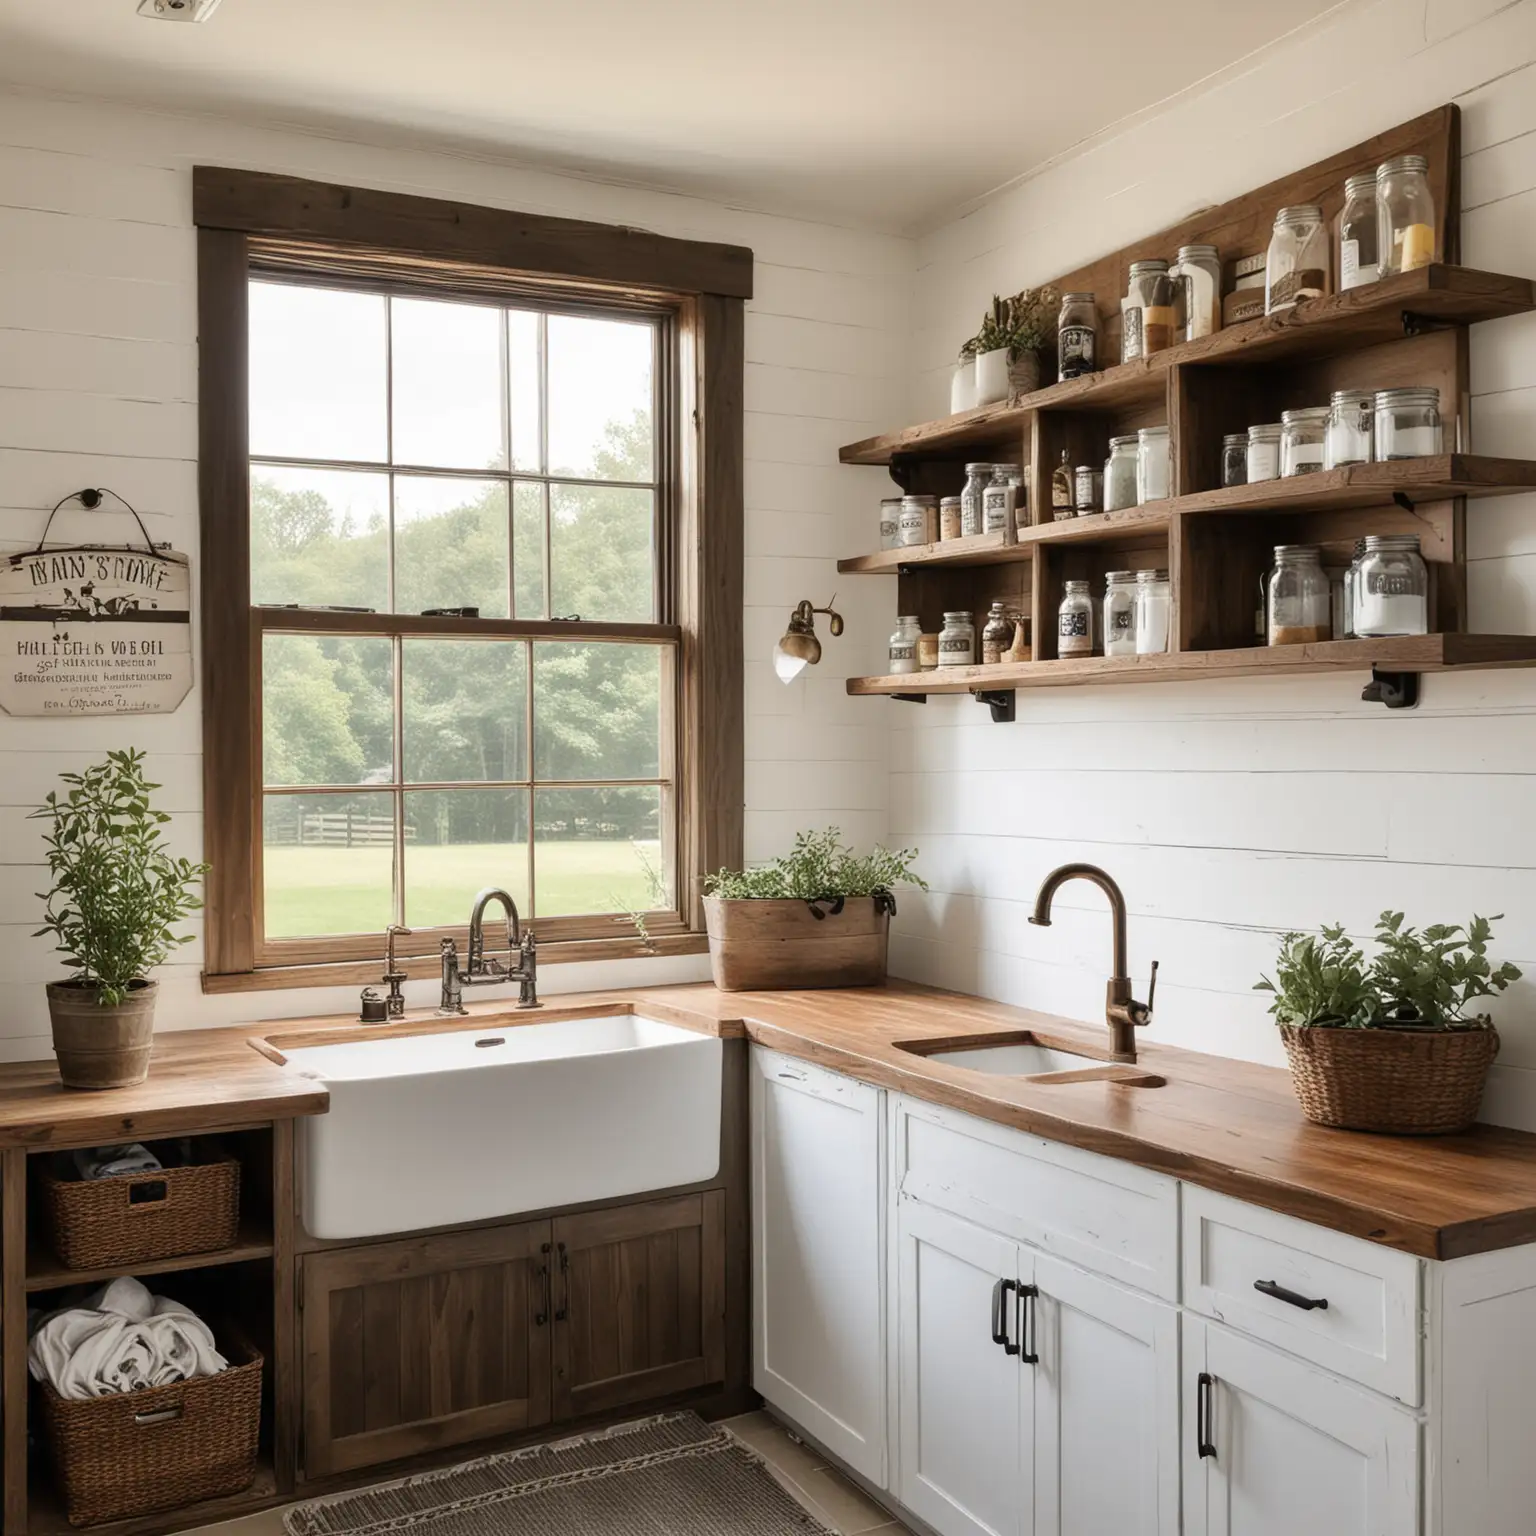 Modern-Farmhouse-Laundry-Room-with-Rustic-Decor-and-Brass-Accents